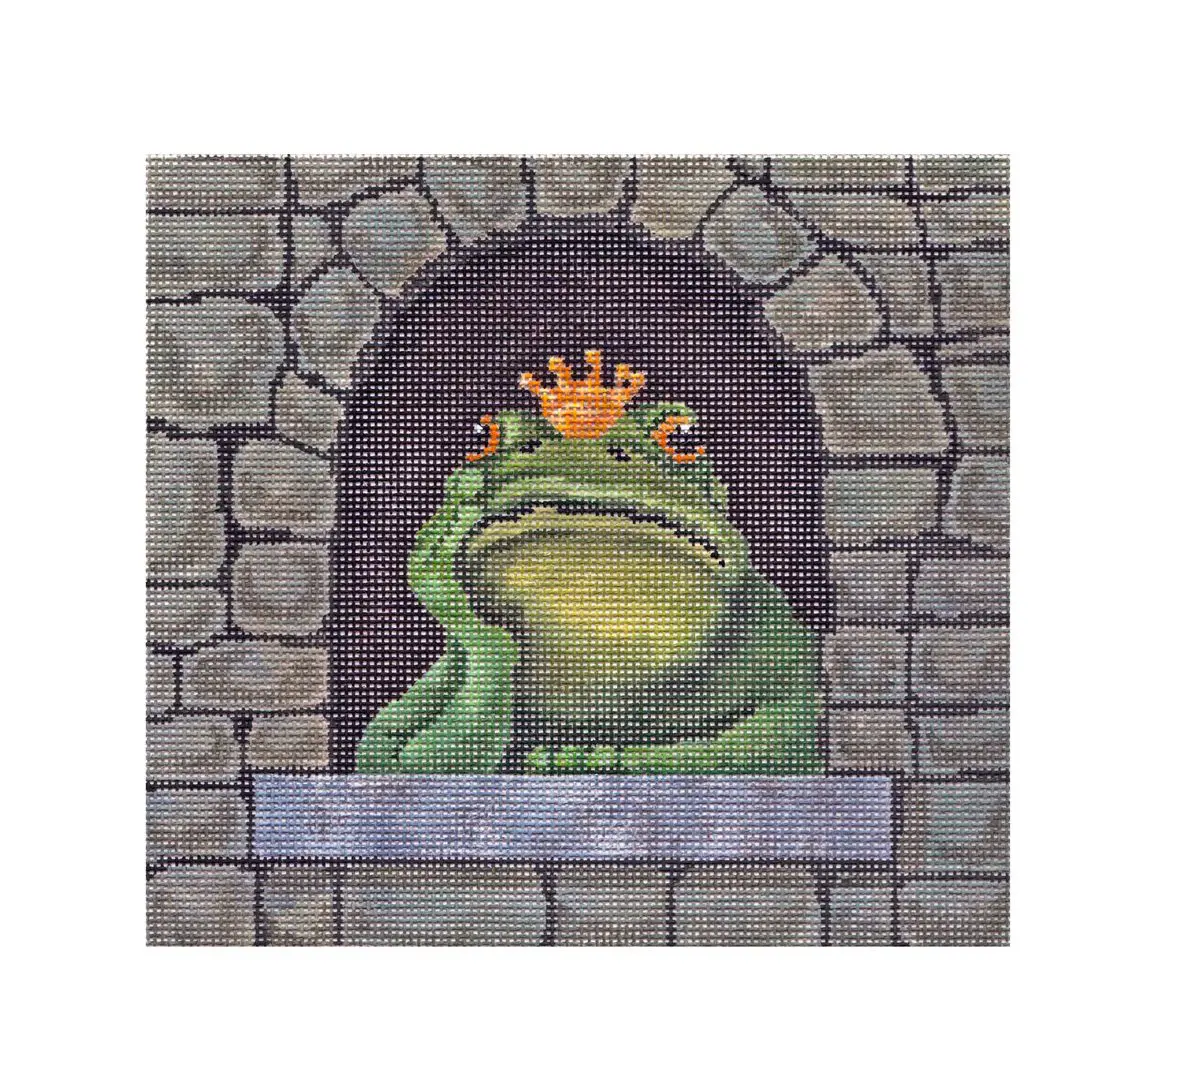 A green frog with a crown sitting in a window, adorned by Cecilia Ohm Eriksen's artistic touch.